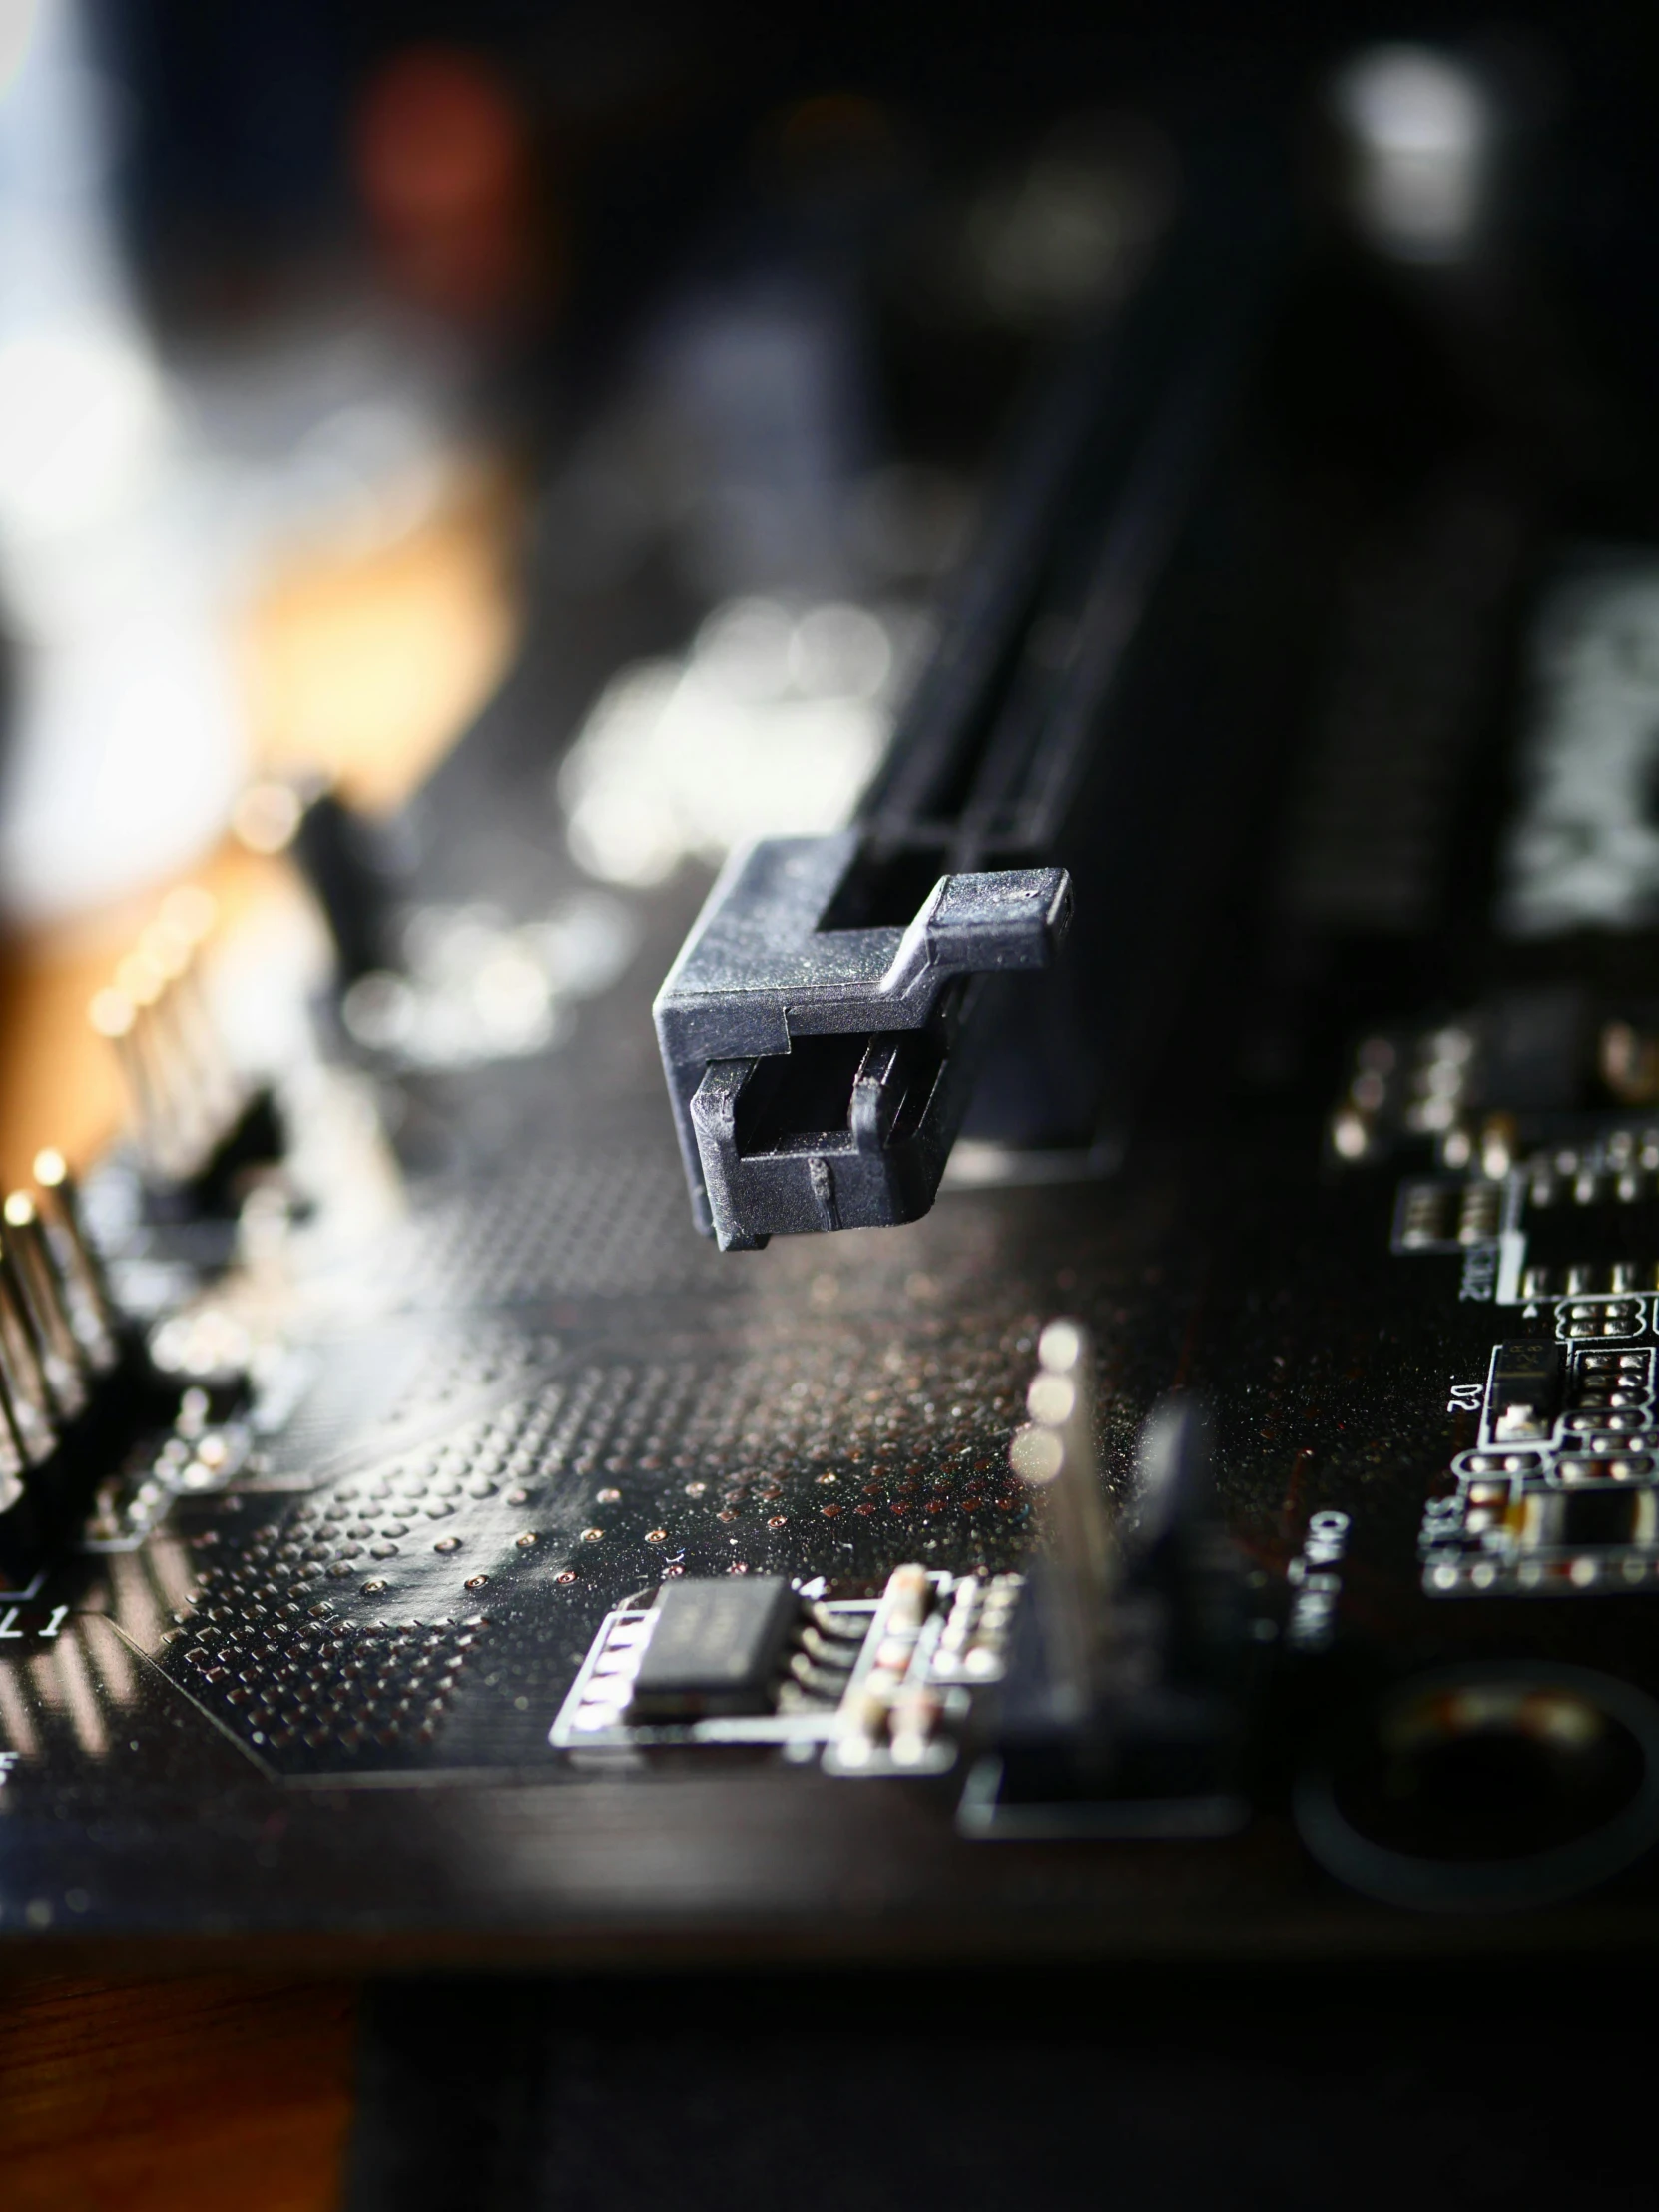 a close up of a computer mother board, by Jason Felix, unsplash, panel of black, adafruit, gaming pc case, photographed for reuters